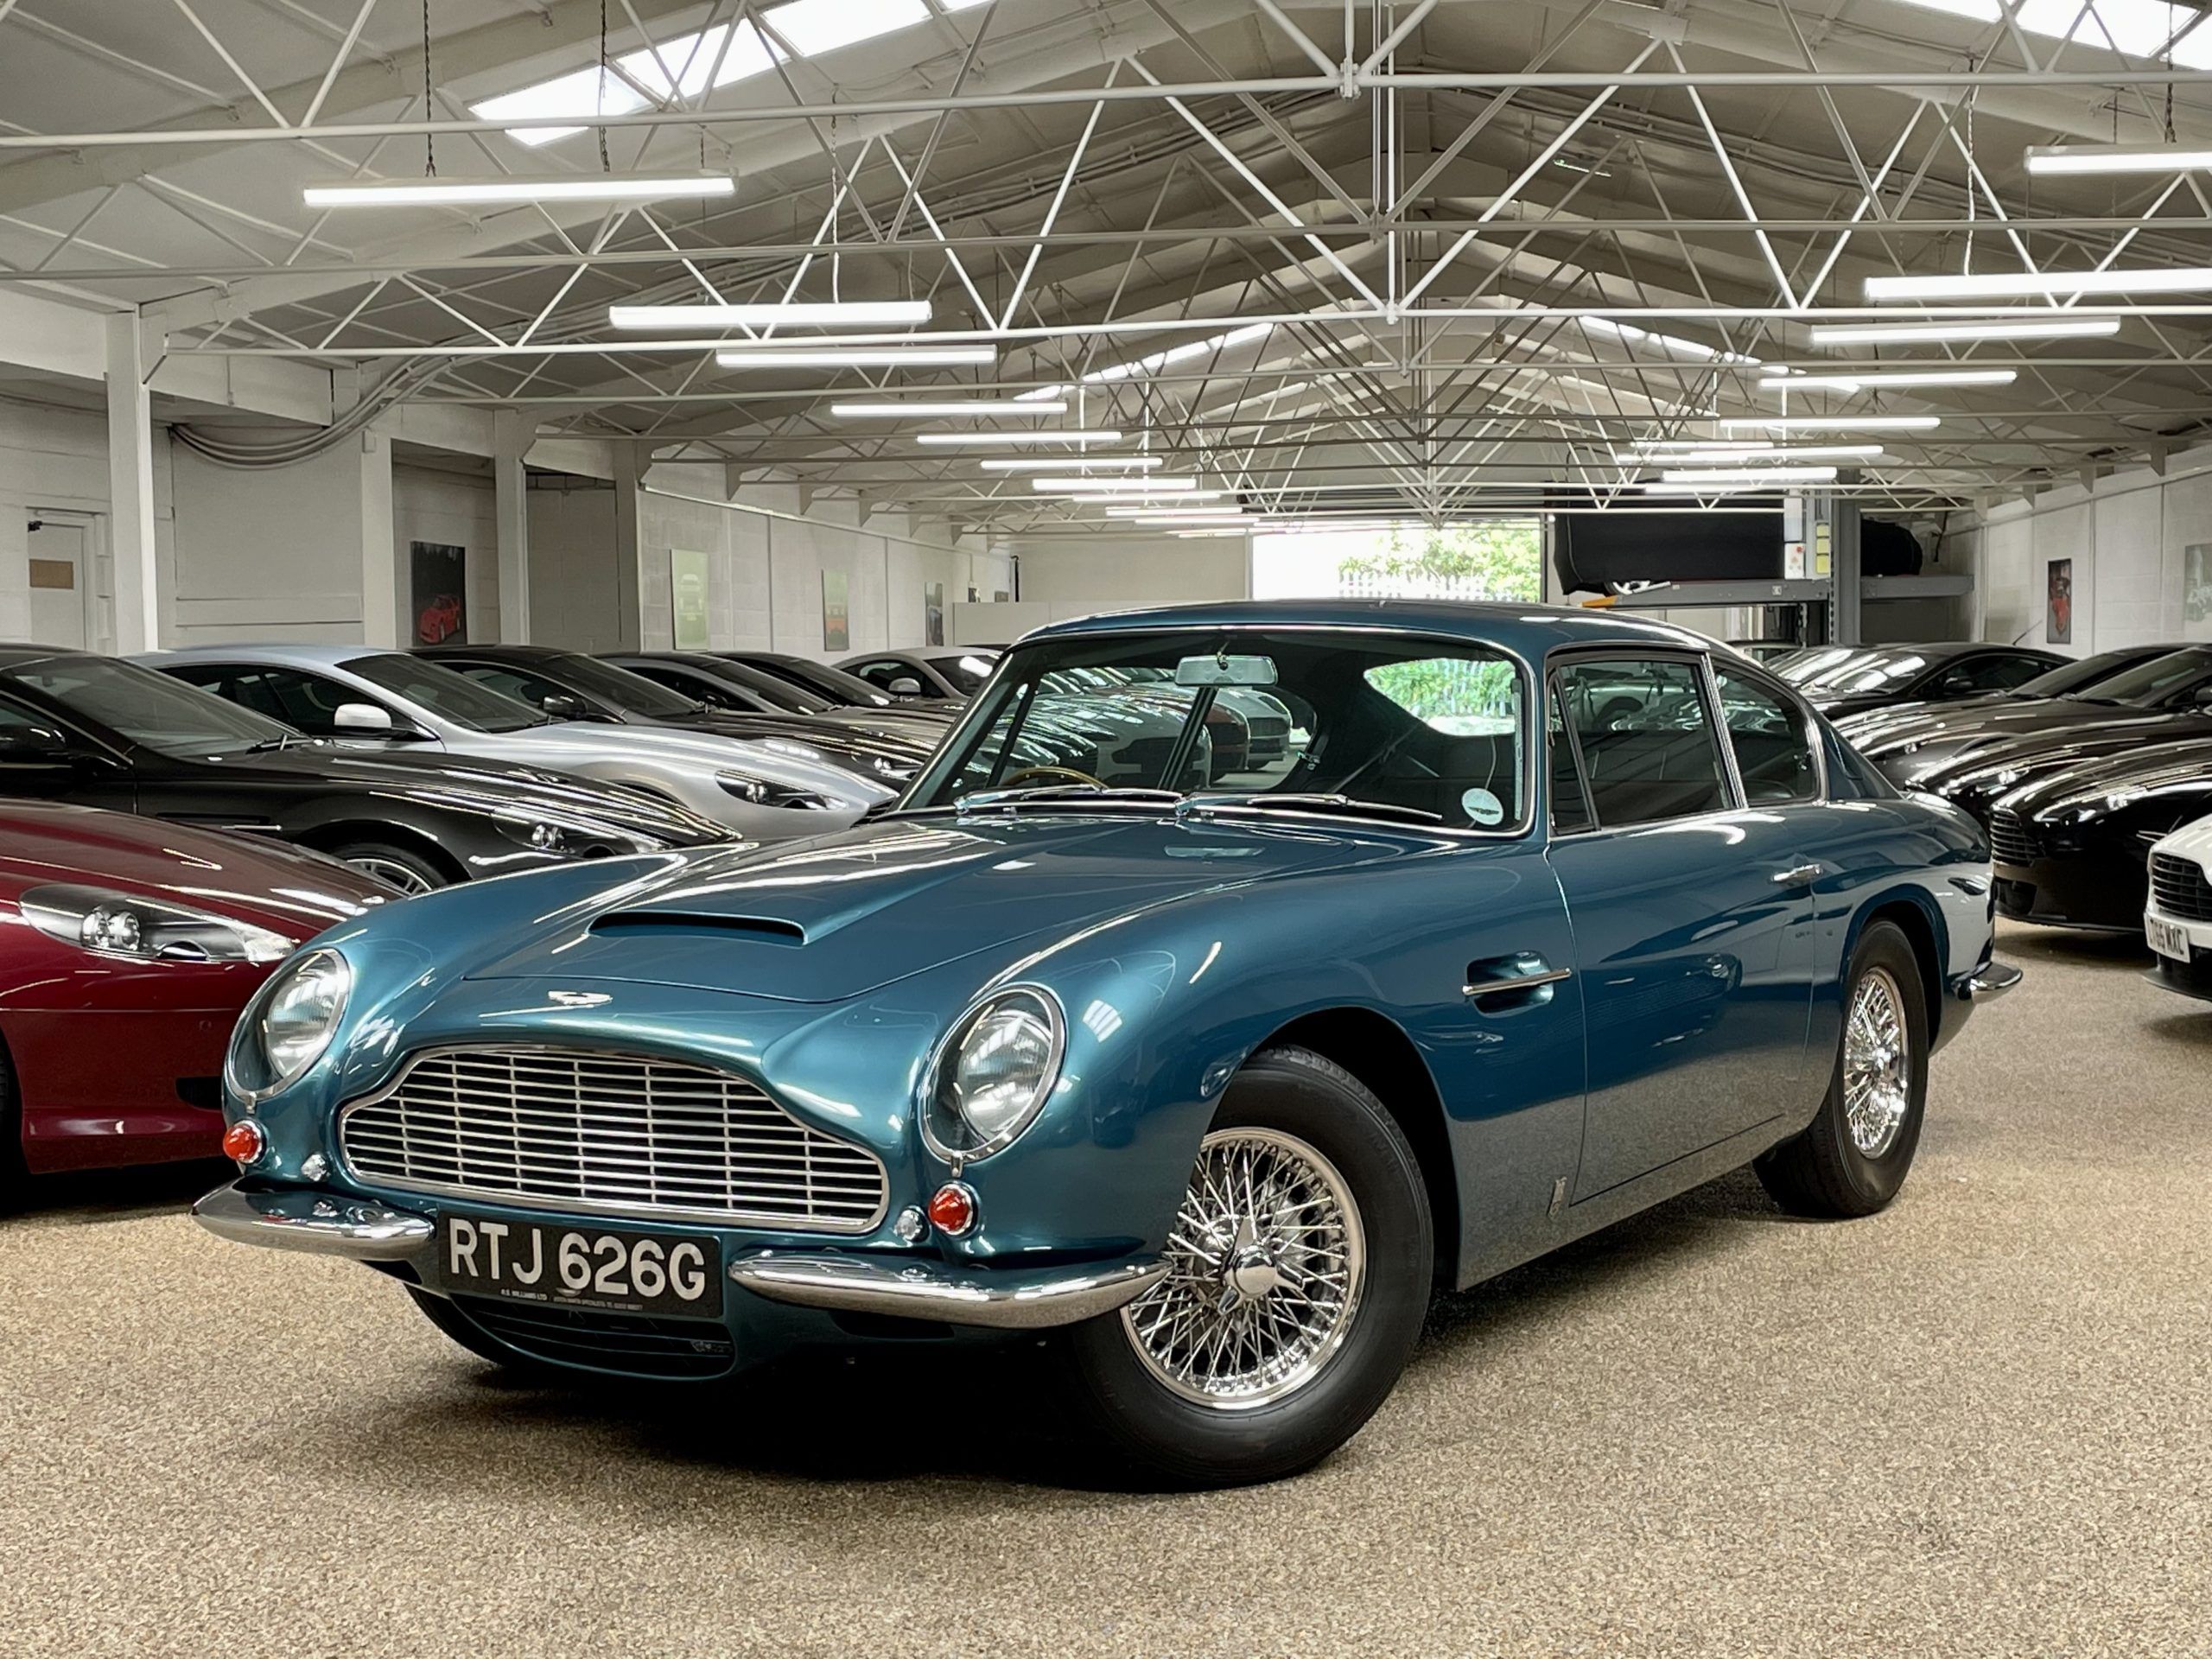 Used DB6 for sale